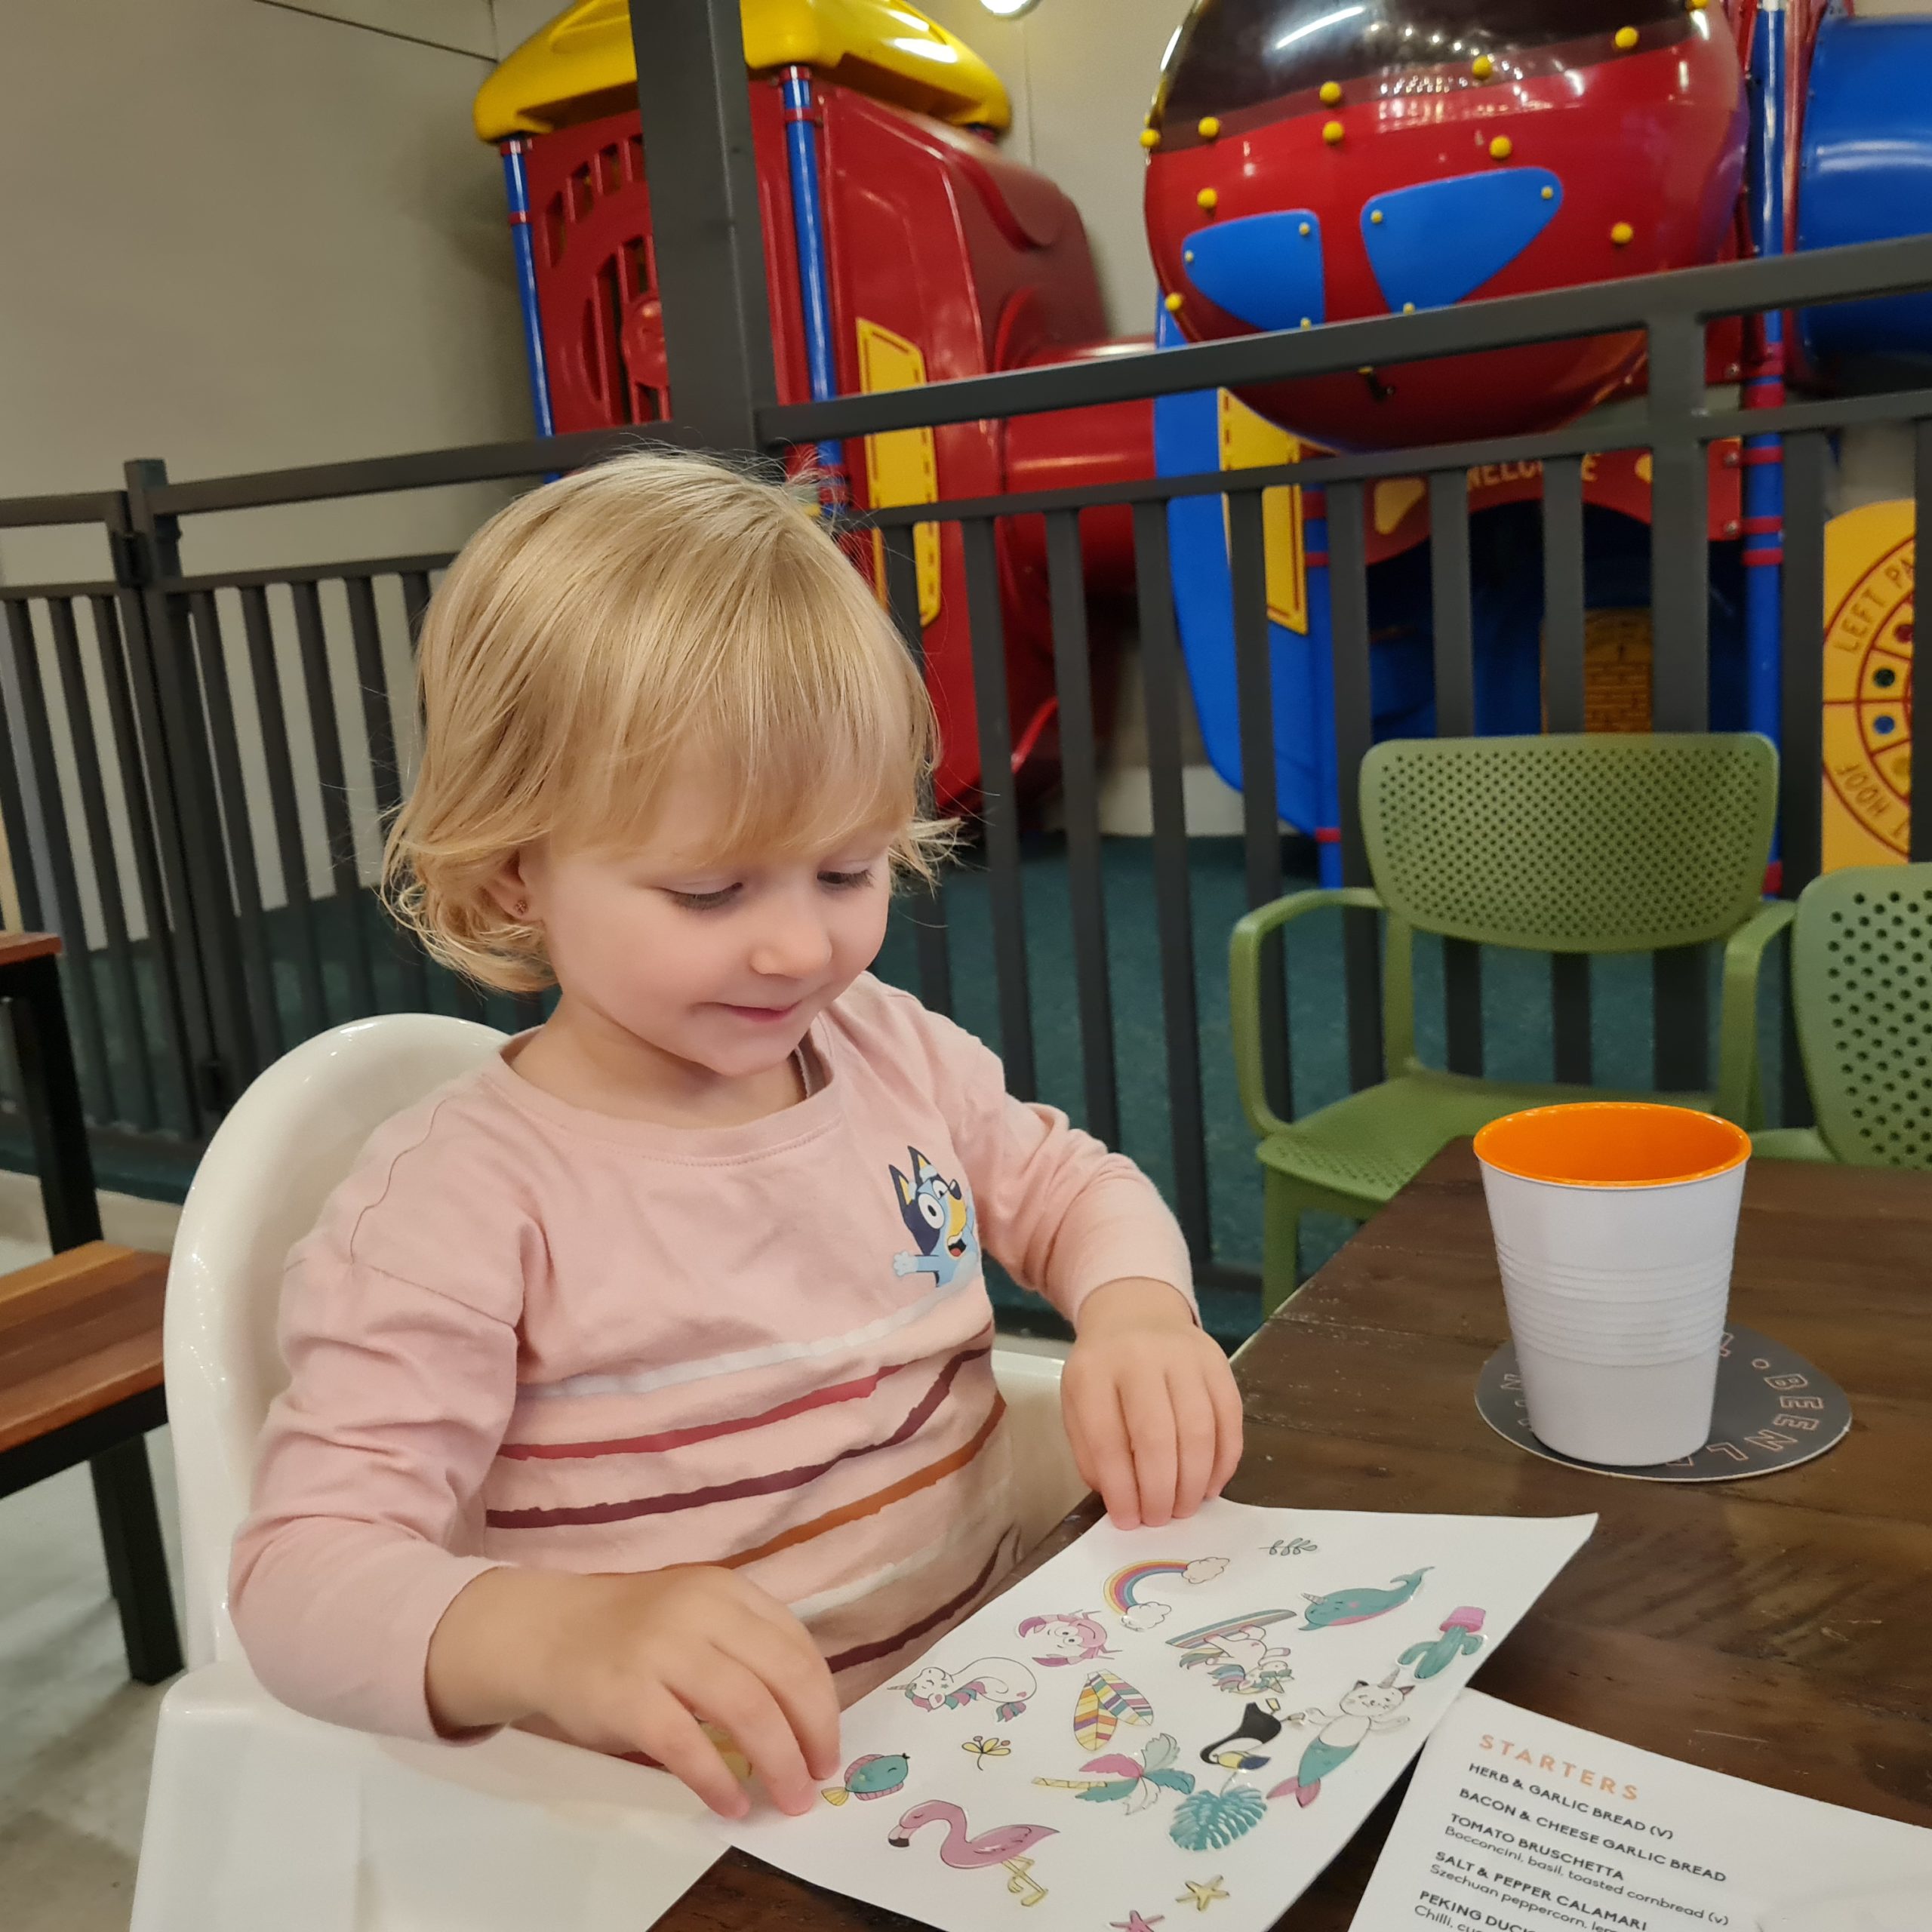 Eating out with Toddlers